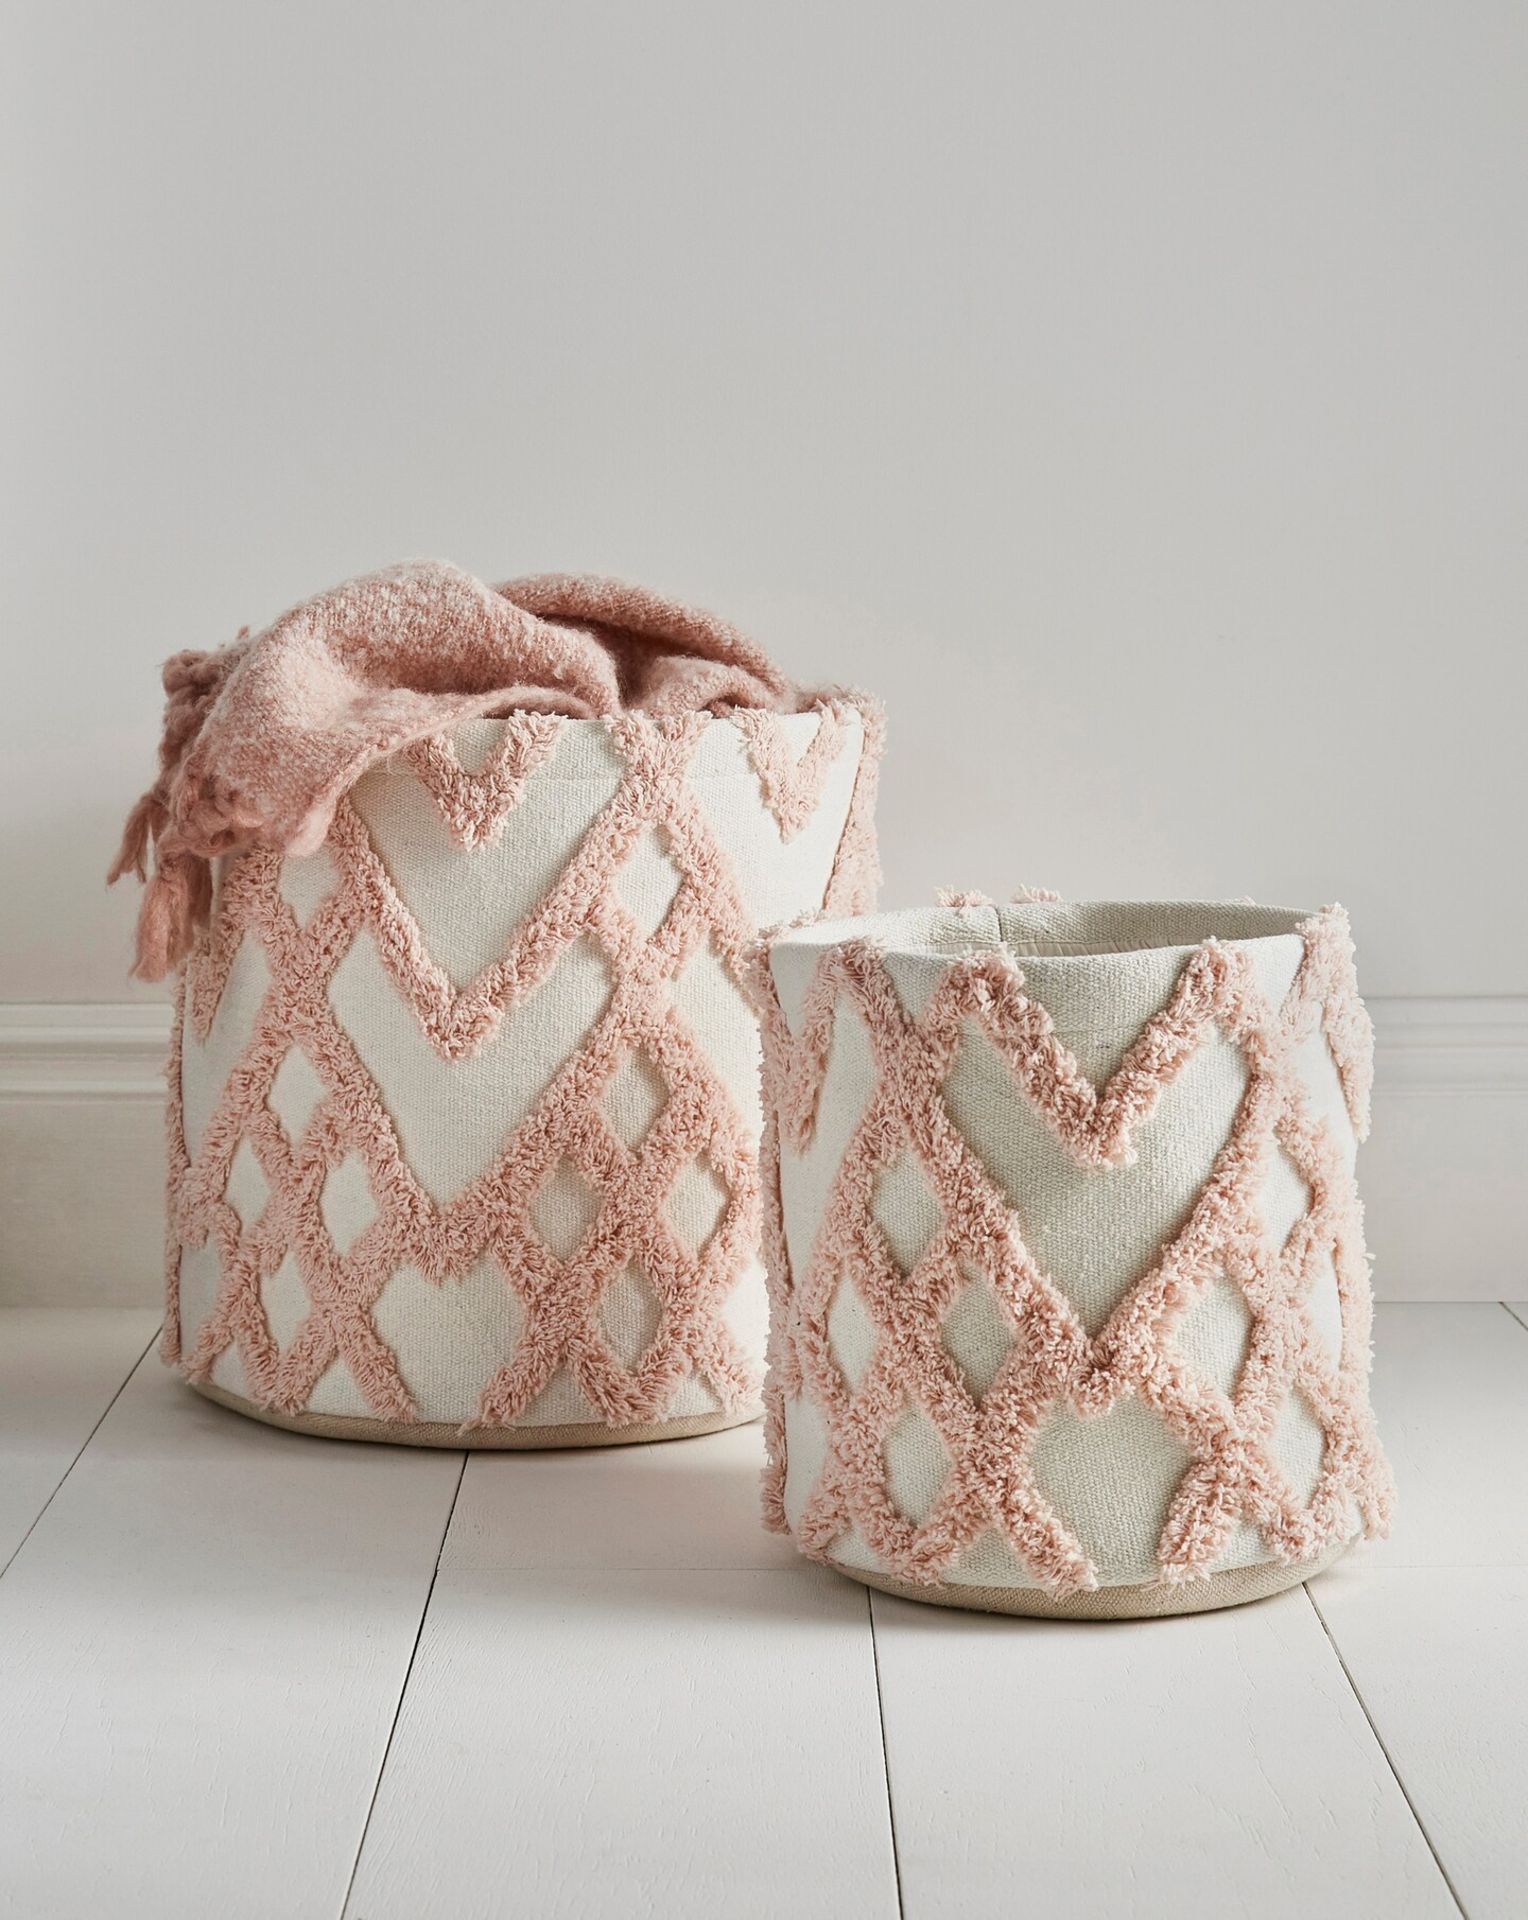 4x BRAND NEW Set of 2 Pink Ruffled Woven Baskets. RRP £39 EACH. These lovely monochrome woven